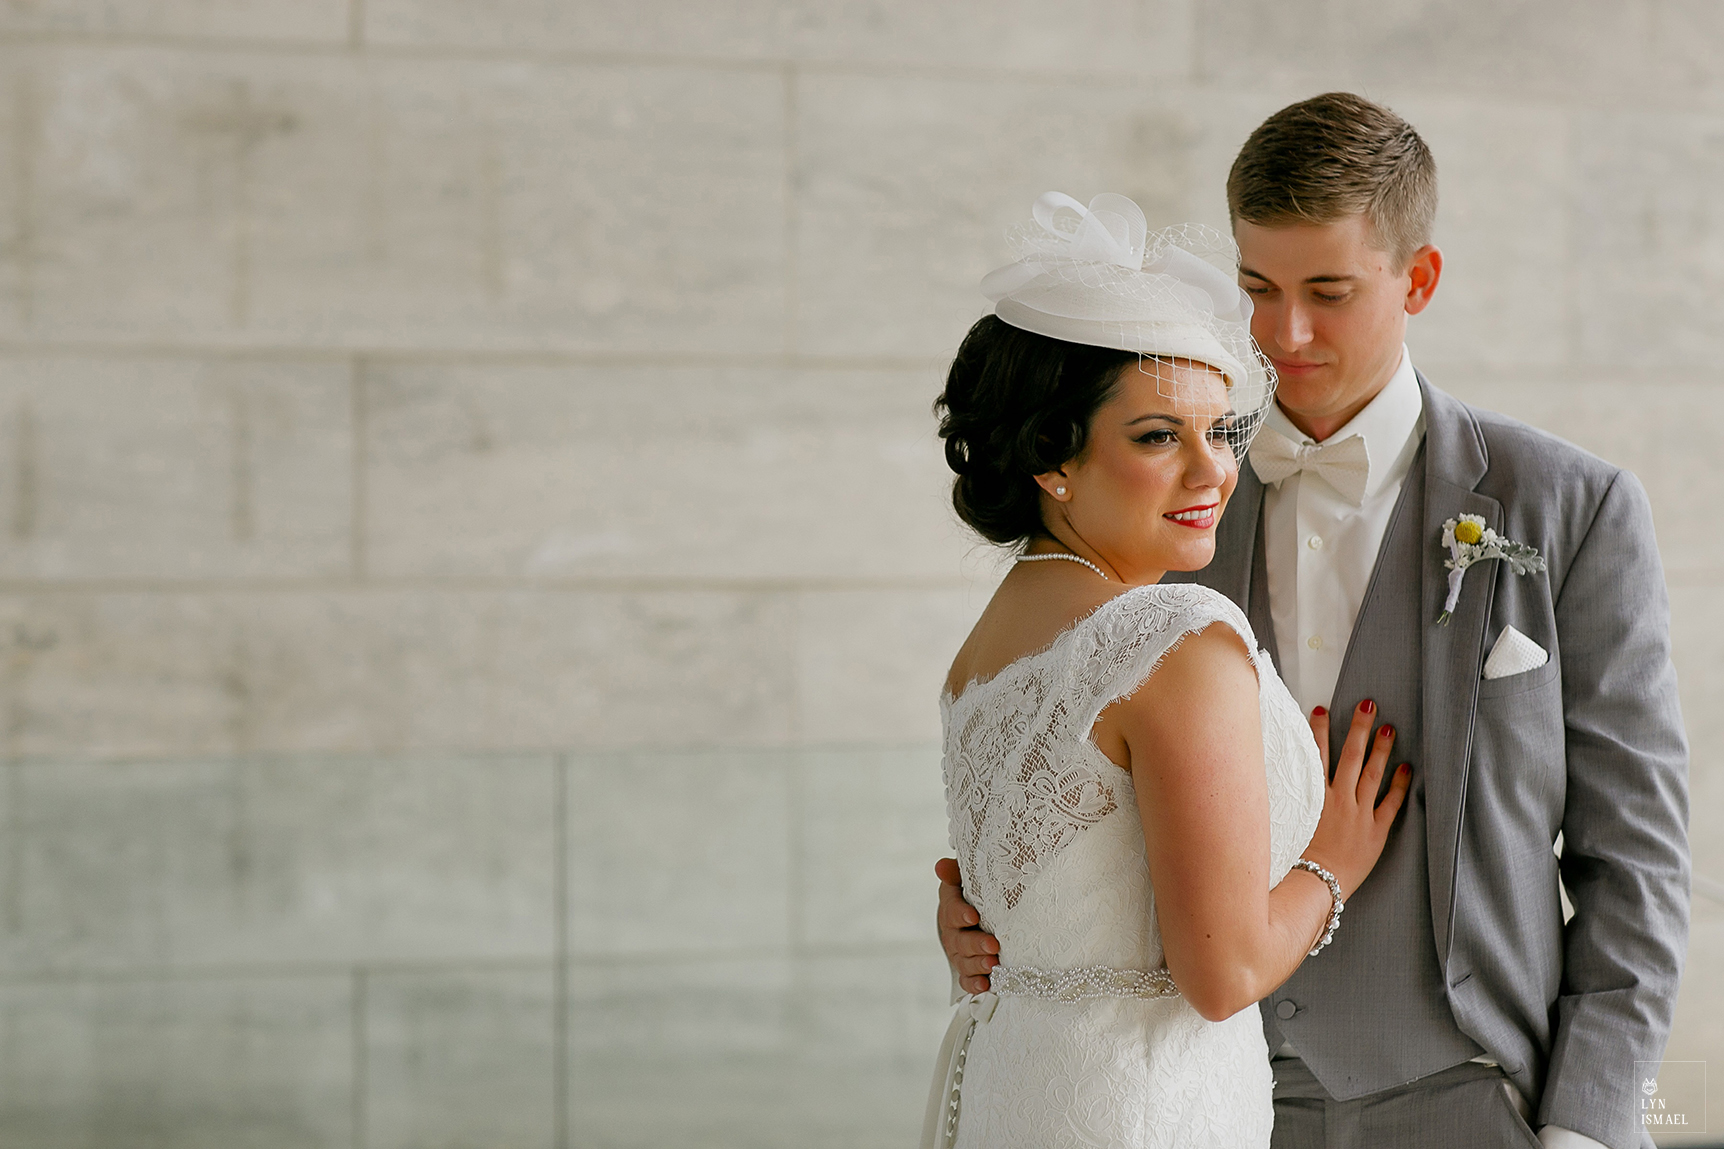 Beautiful bride wearing a vintage headdress poses with her groom